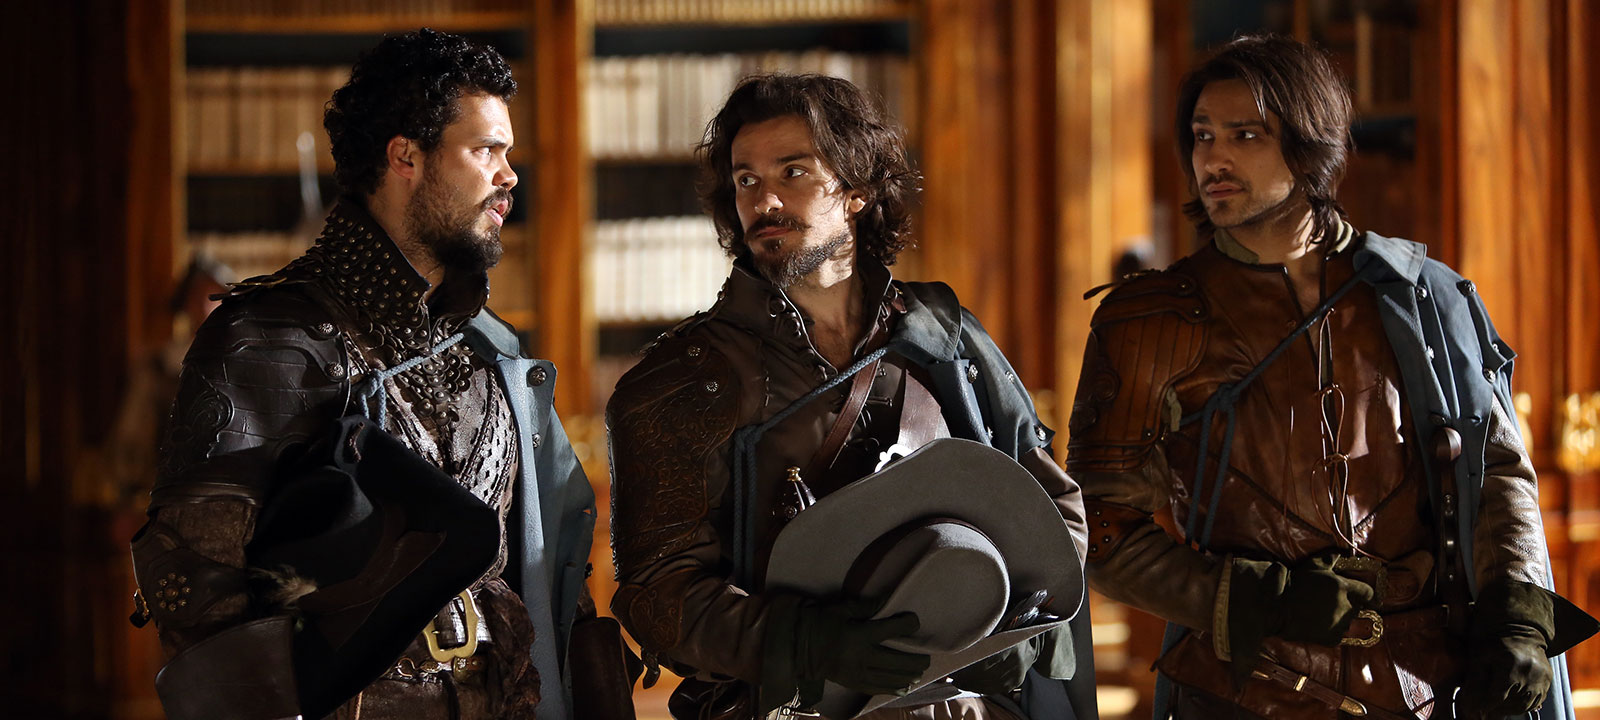 Nice Images Collection: The Musketeers Desktop Wallpapers